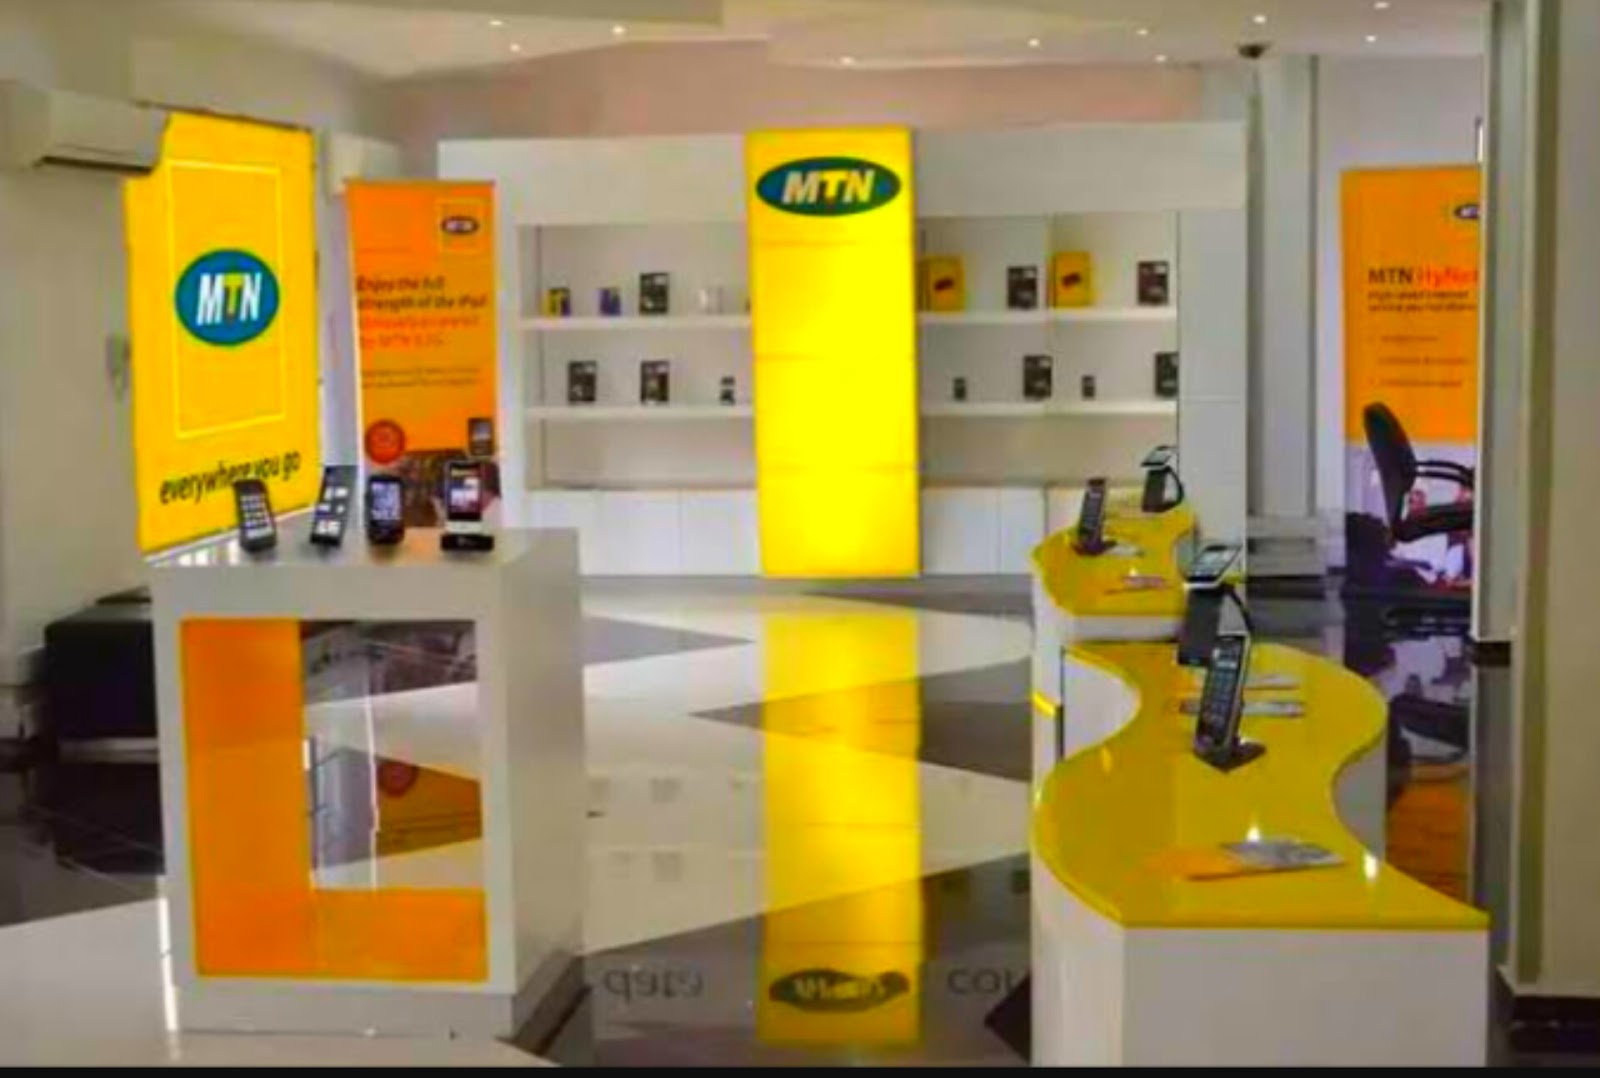 MTN CUG subscription portrayed with mtn offices pictures 